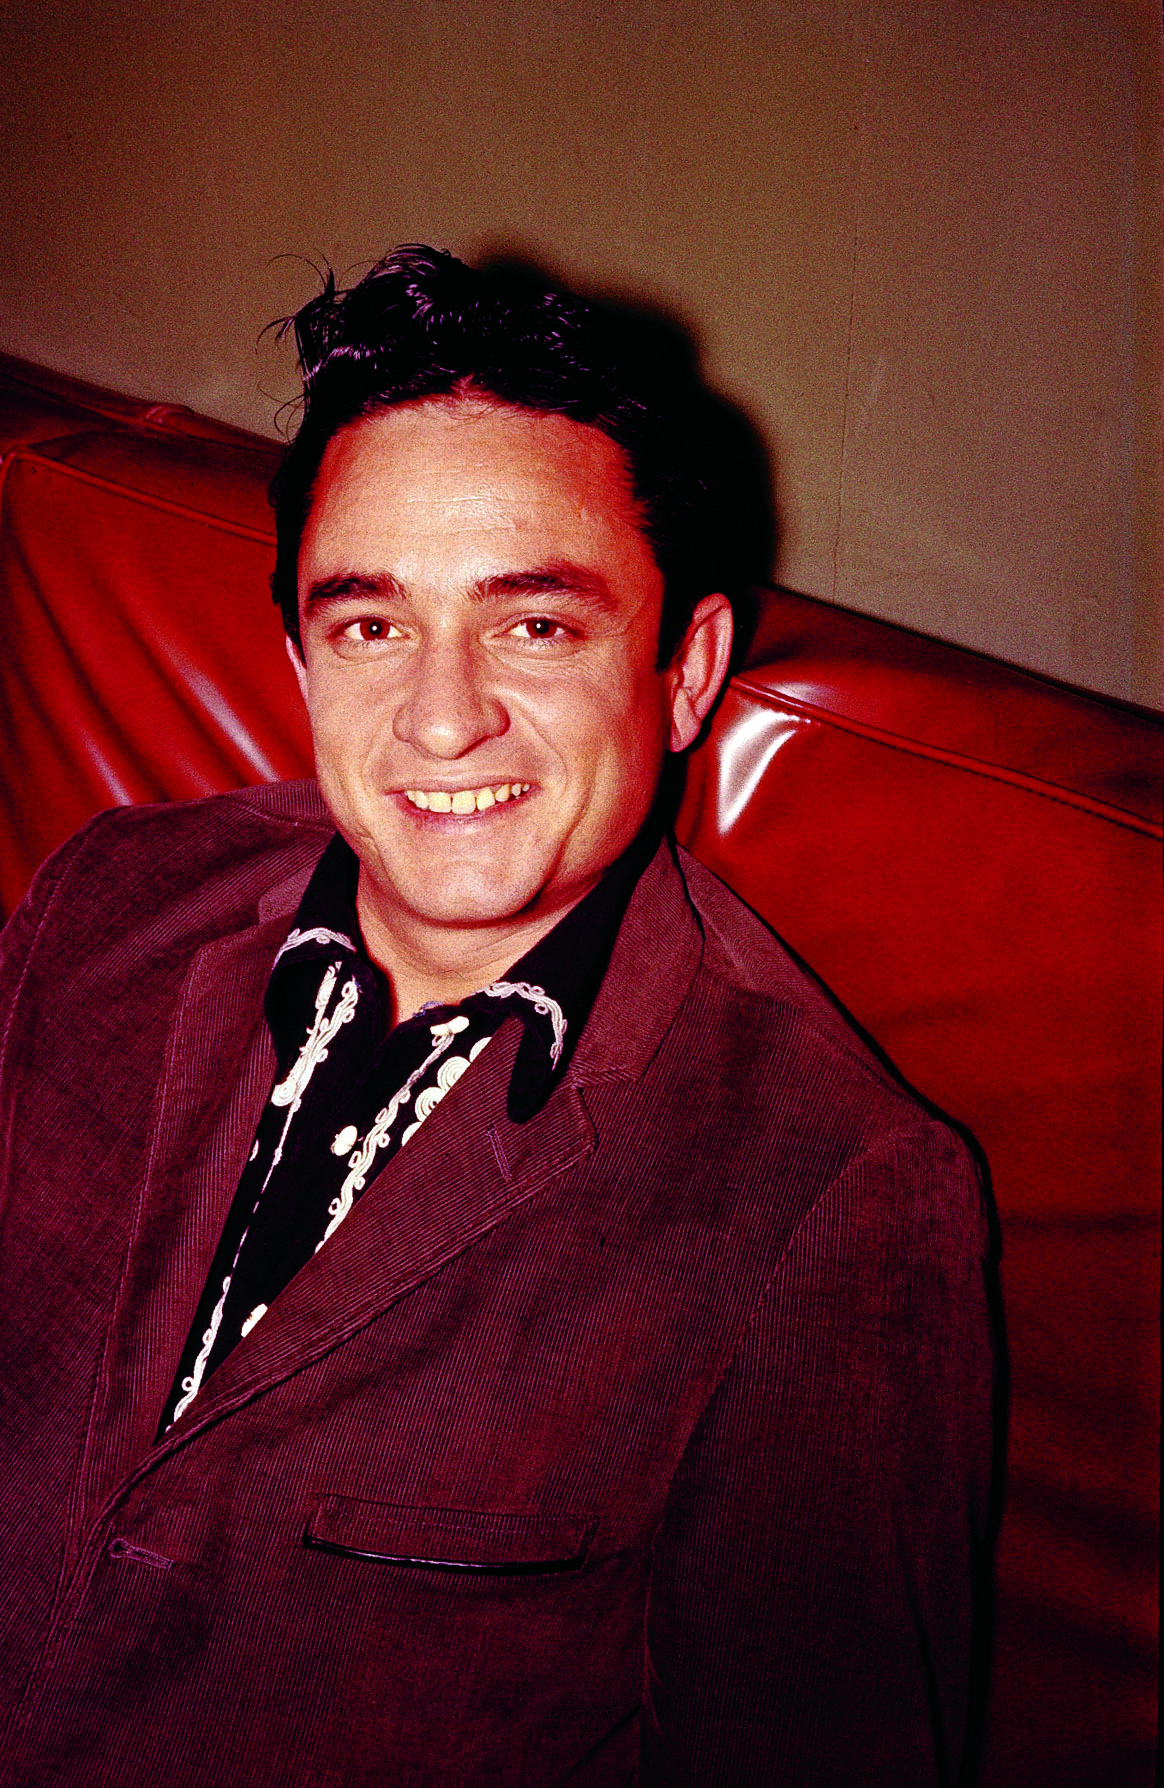 News and entertainment: johnny cash (Jan 04 2013 17:37:15)